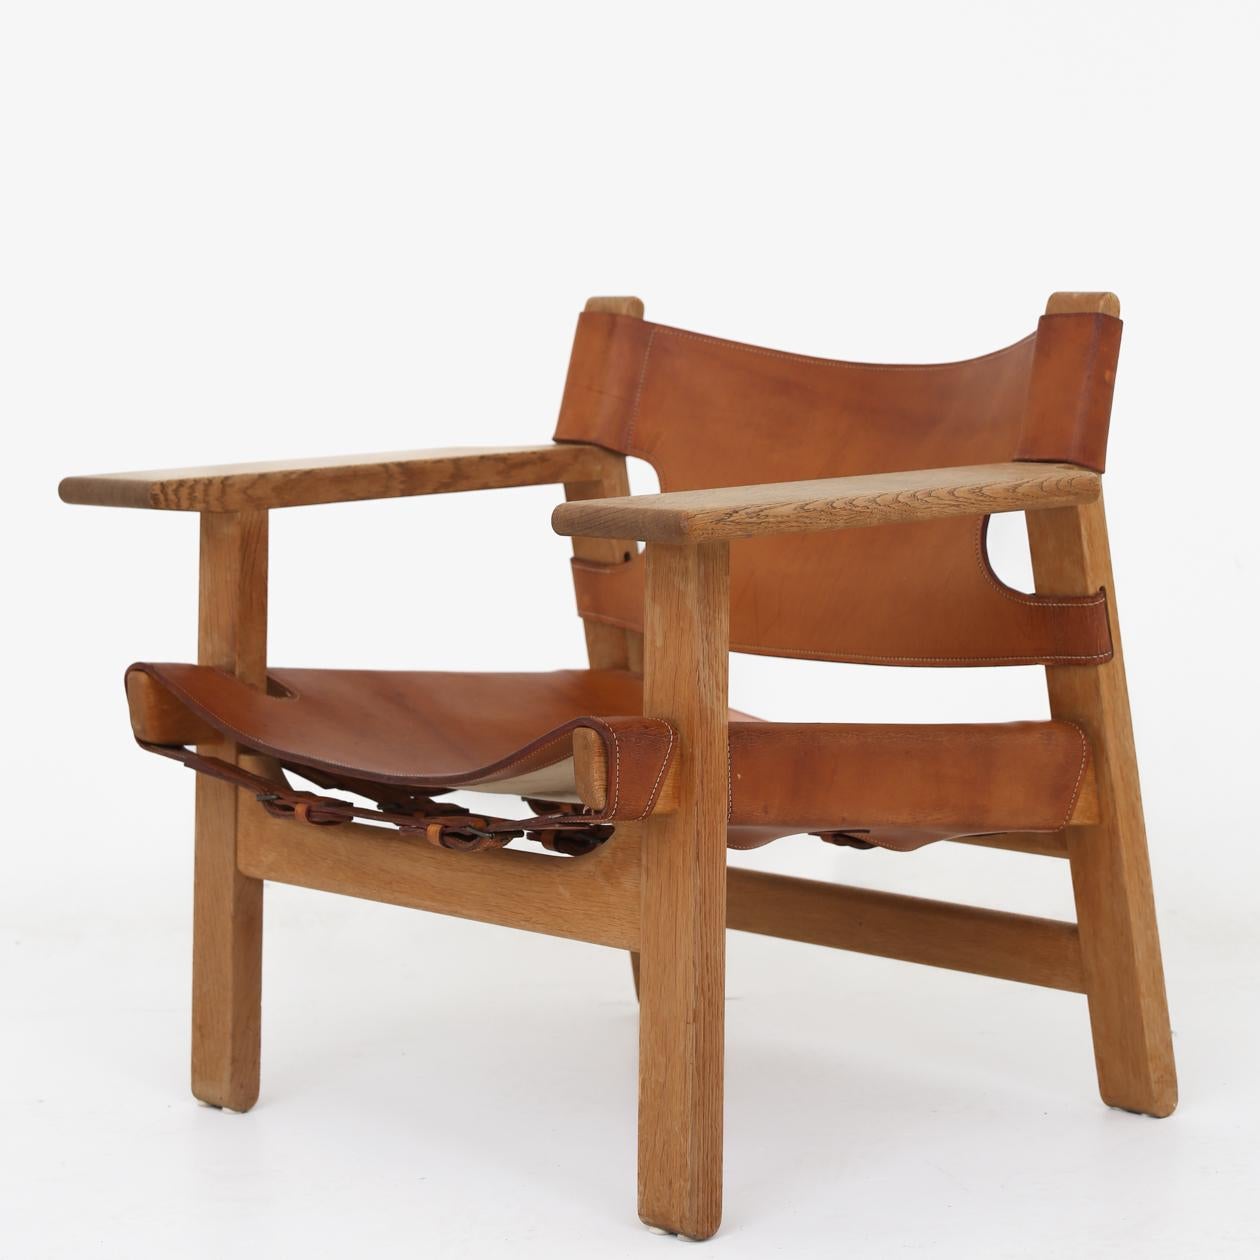 BM 2226 - A pair of two Spanish chairs in patinated oak and core leather. Designed in 1958. Børge Mogensen / Fredericia Furniture.